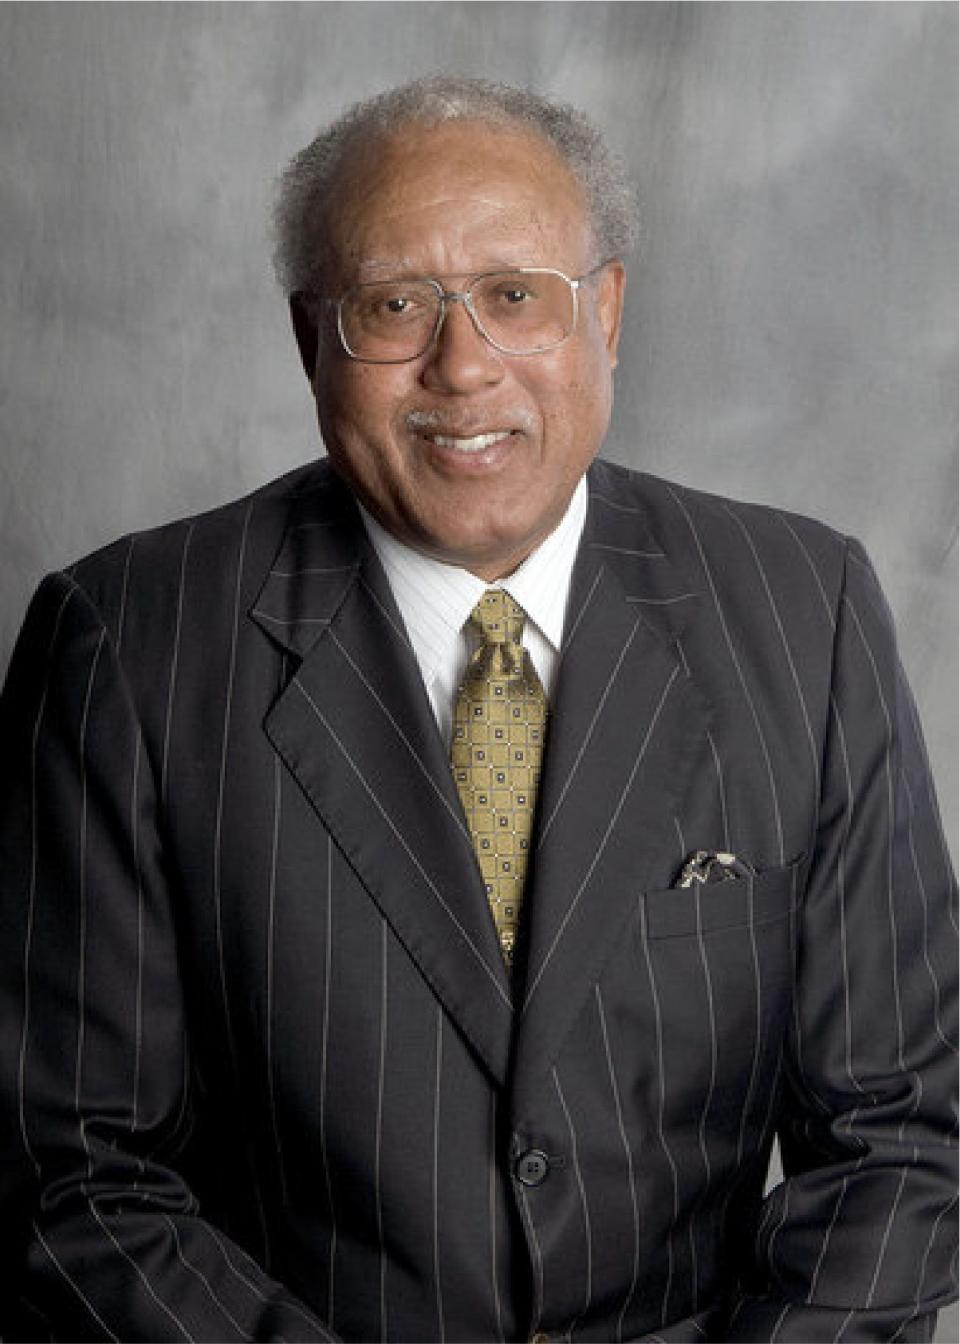 Former Alabama State University President William H. Harris died Friday, April 19, at age 79.